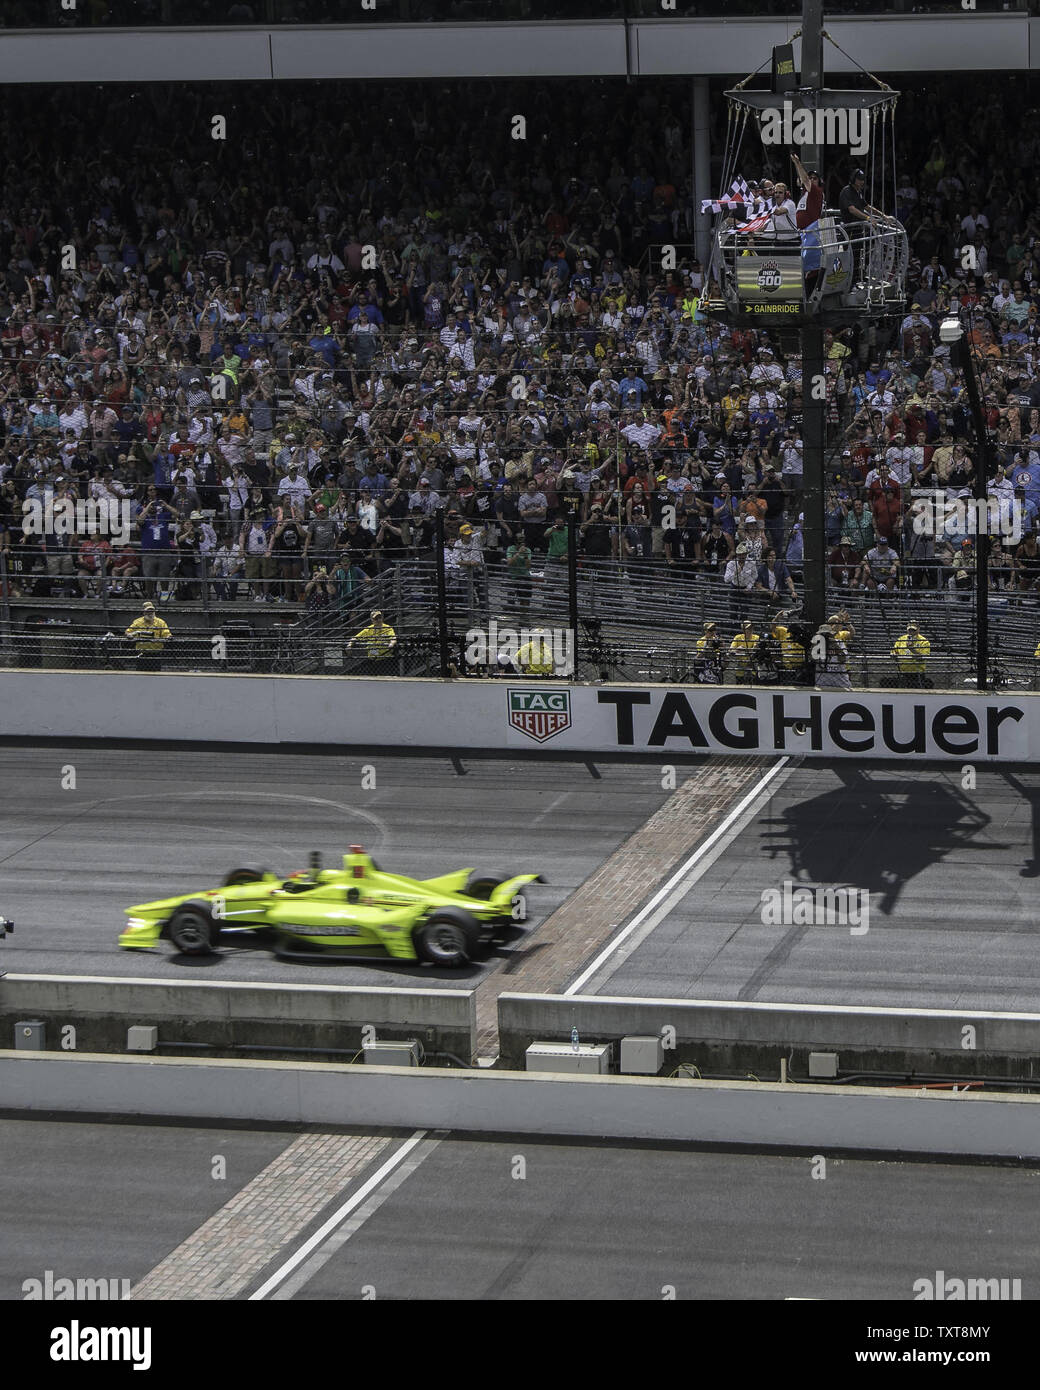 Simon Pagenaud drives the Menards Team Penske Chevrolet to victory the103rd running of the Indianapolis 500 at the Indianapolis Motor Speedway on May 26, 2019 in Indianapolis, Indiana.    Photo by Darrell Hoemann/UPI Stock Photo